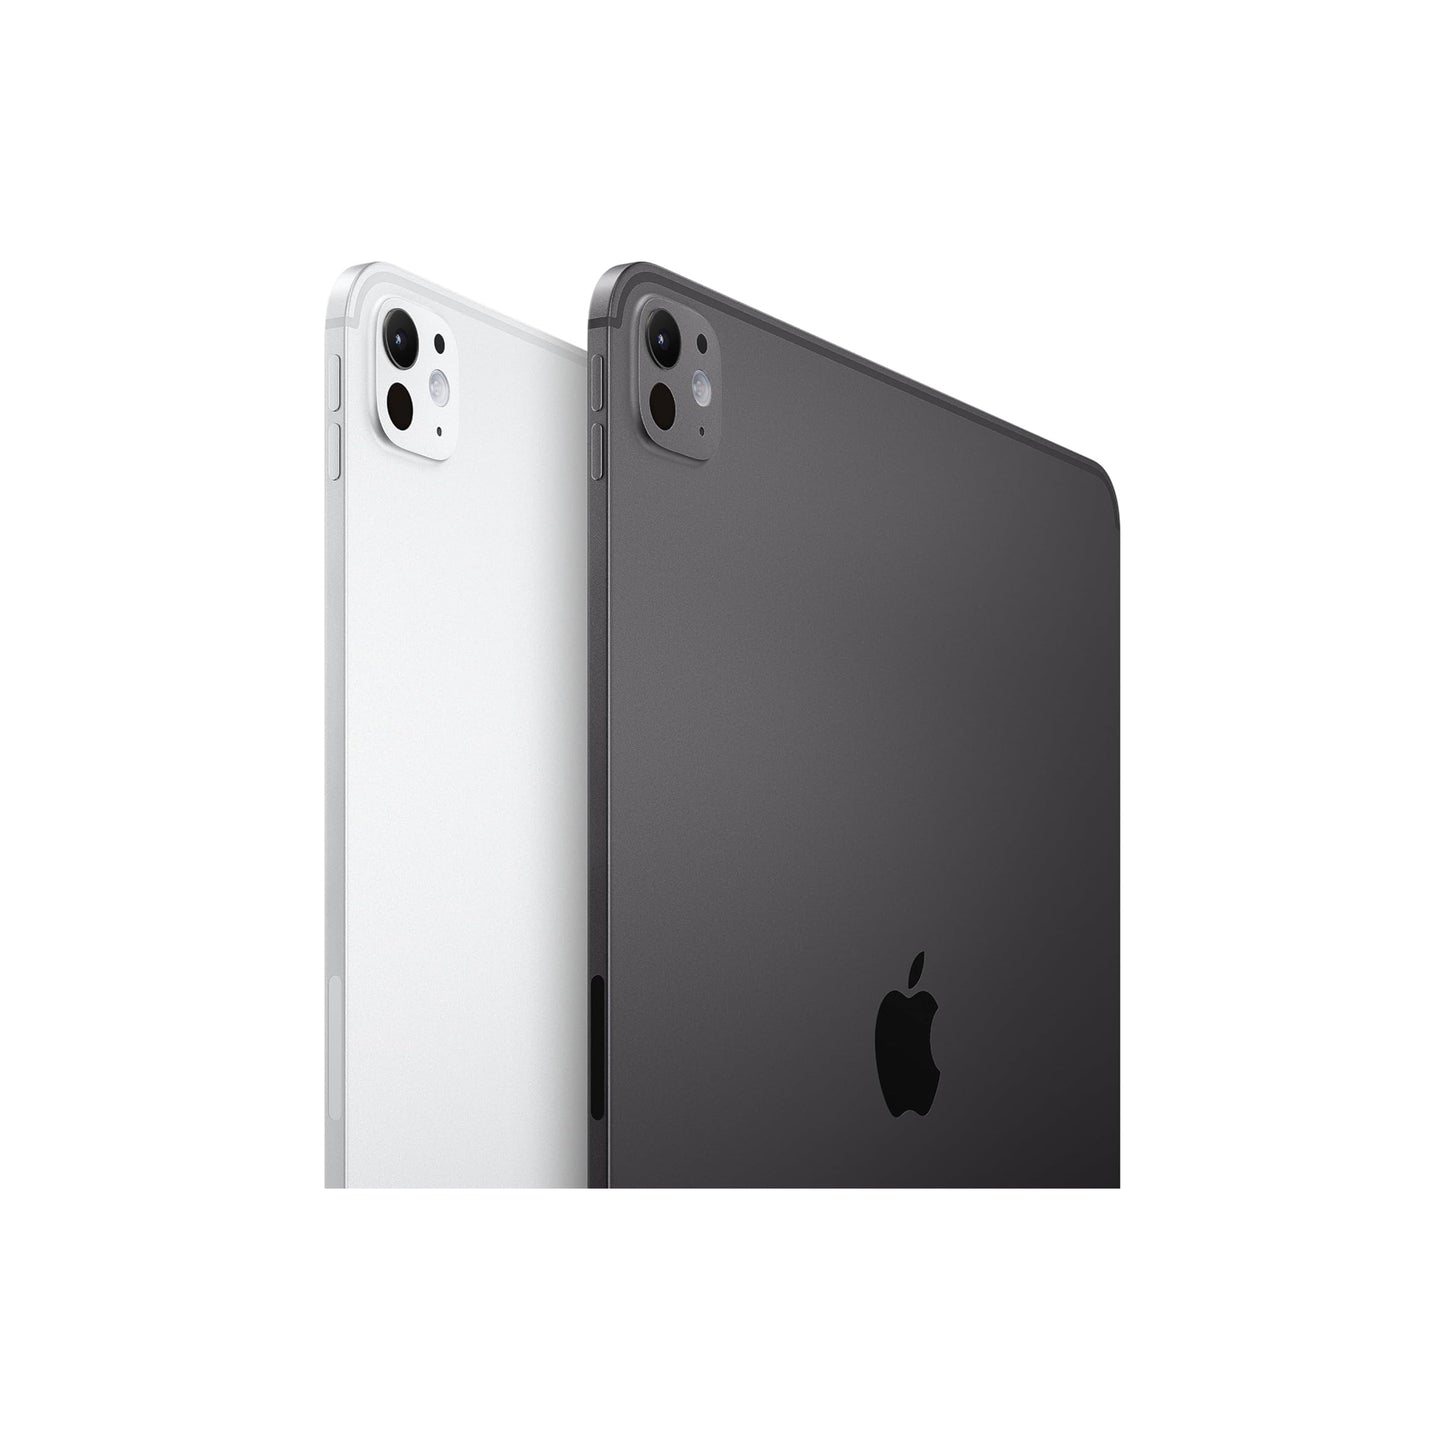 Apple iPad Pro 11-Inch (M4): Ultra Retina XDR Display, 512GB, Landscape 12MP Front Camera/12MP Back Camera, LiDAR Scanner, Wi-Fi 6E + 5G Cellular with eSIM, Face ID, All-Day Battery Life — Silver